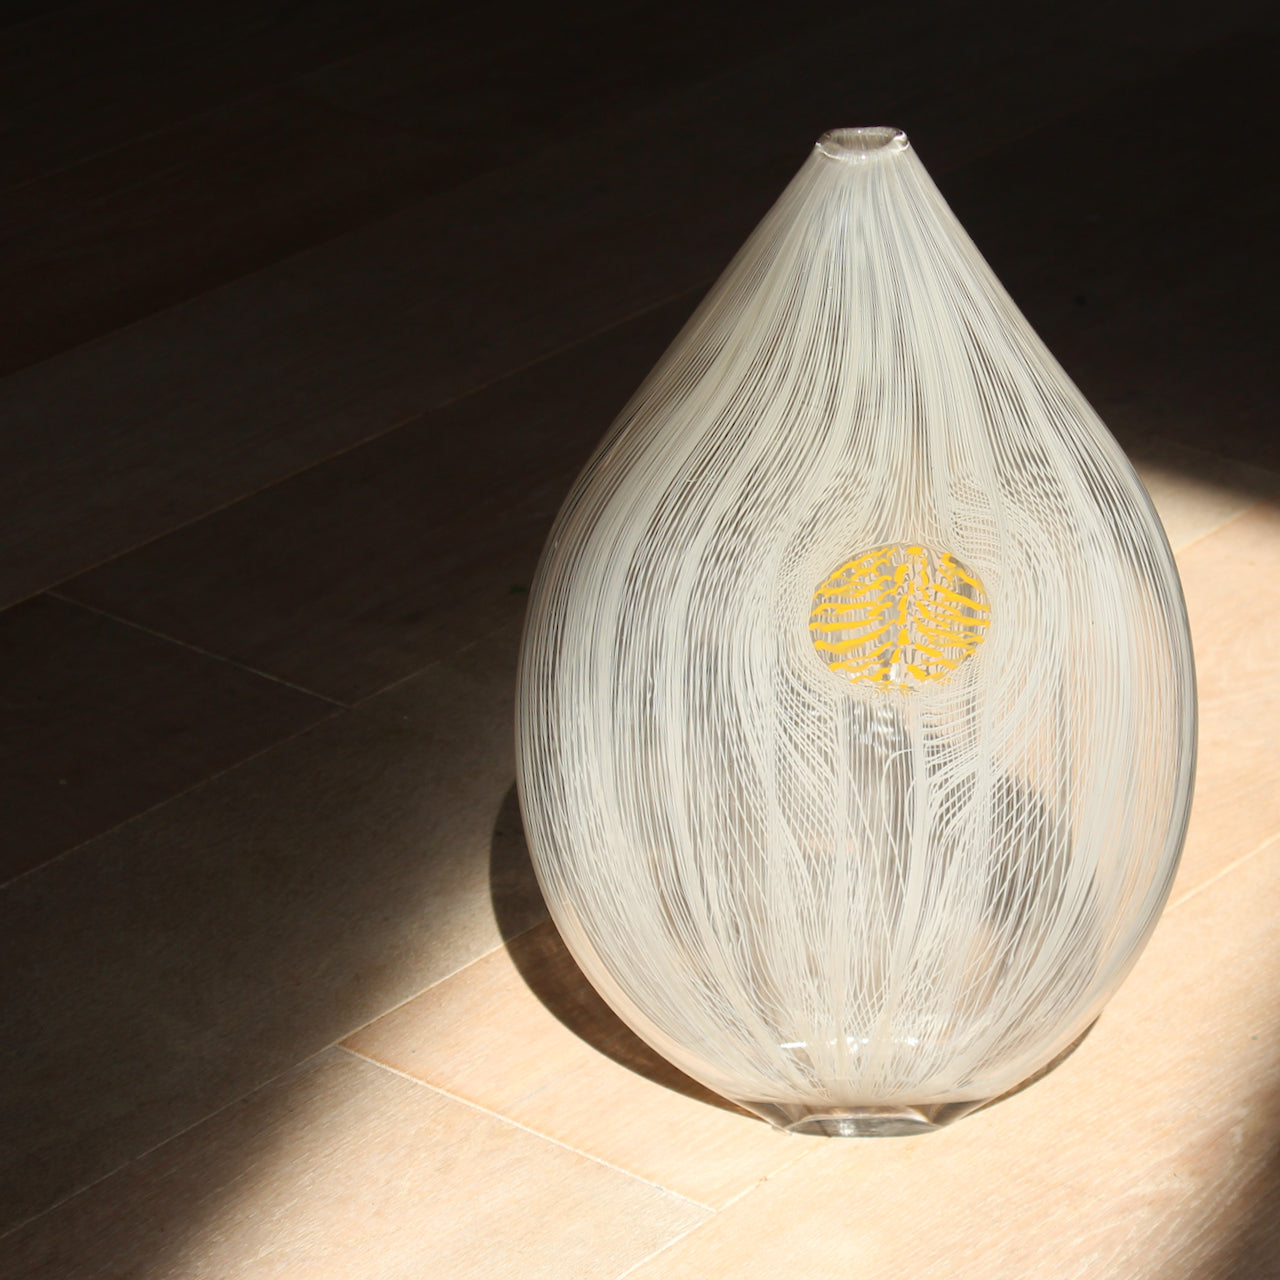 a Benjamin Lintell tear shaped glass vase in  white and clear with central yellow detail.